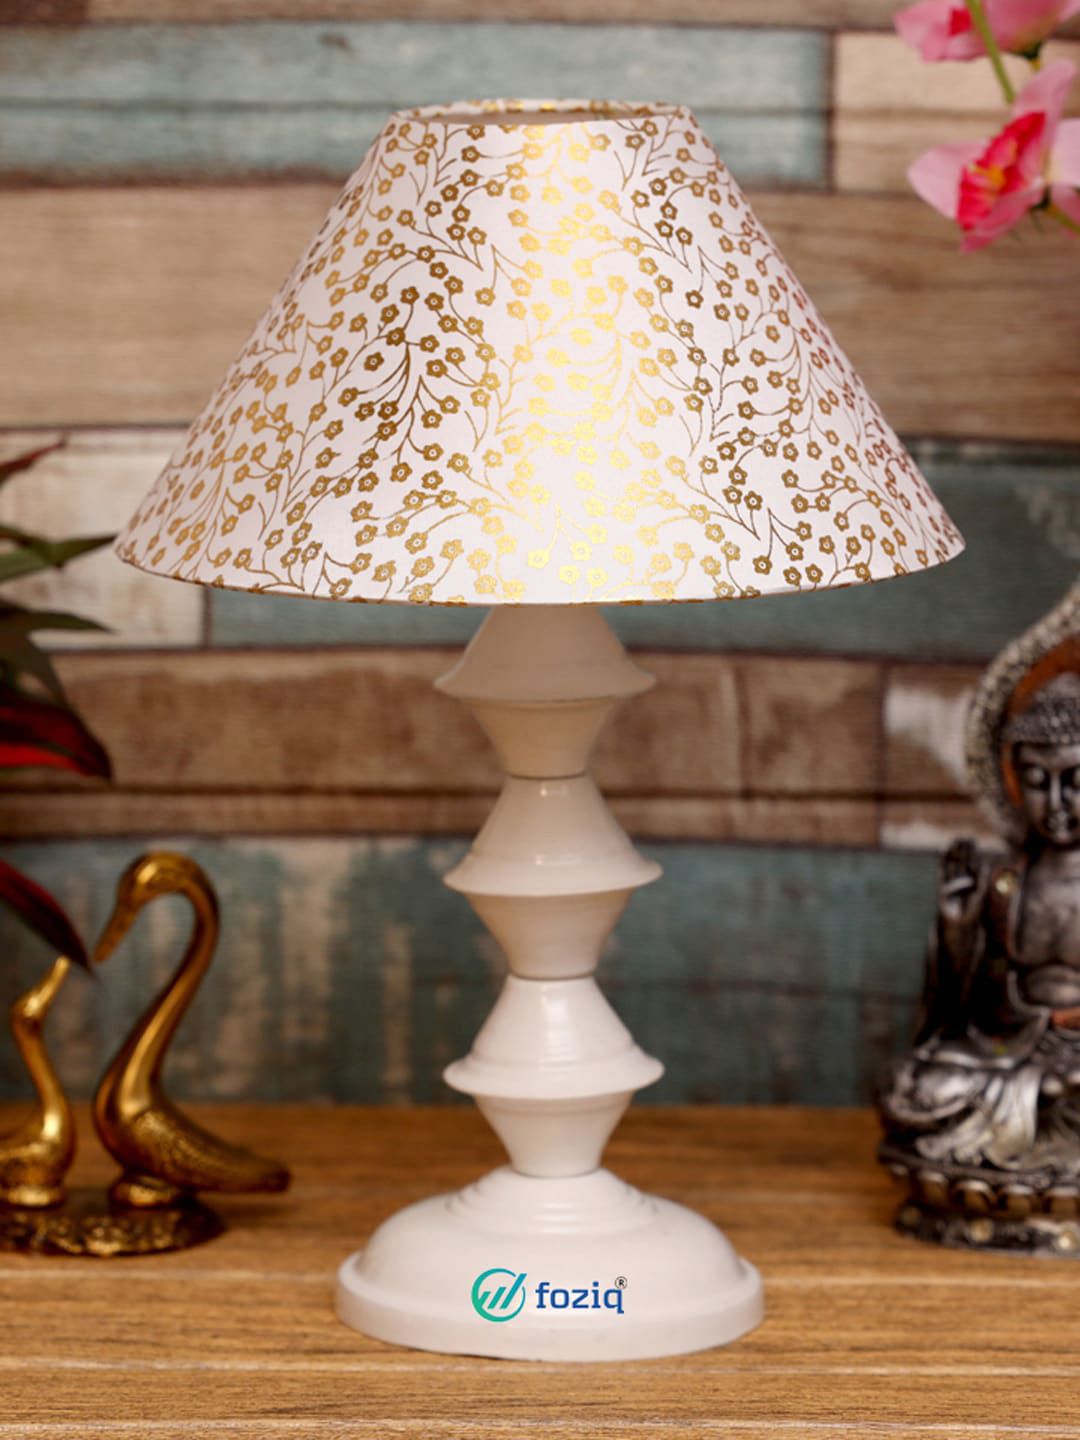 foziq Adults White & Gold-Toned Printed Table Lamp Price in India